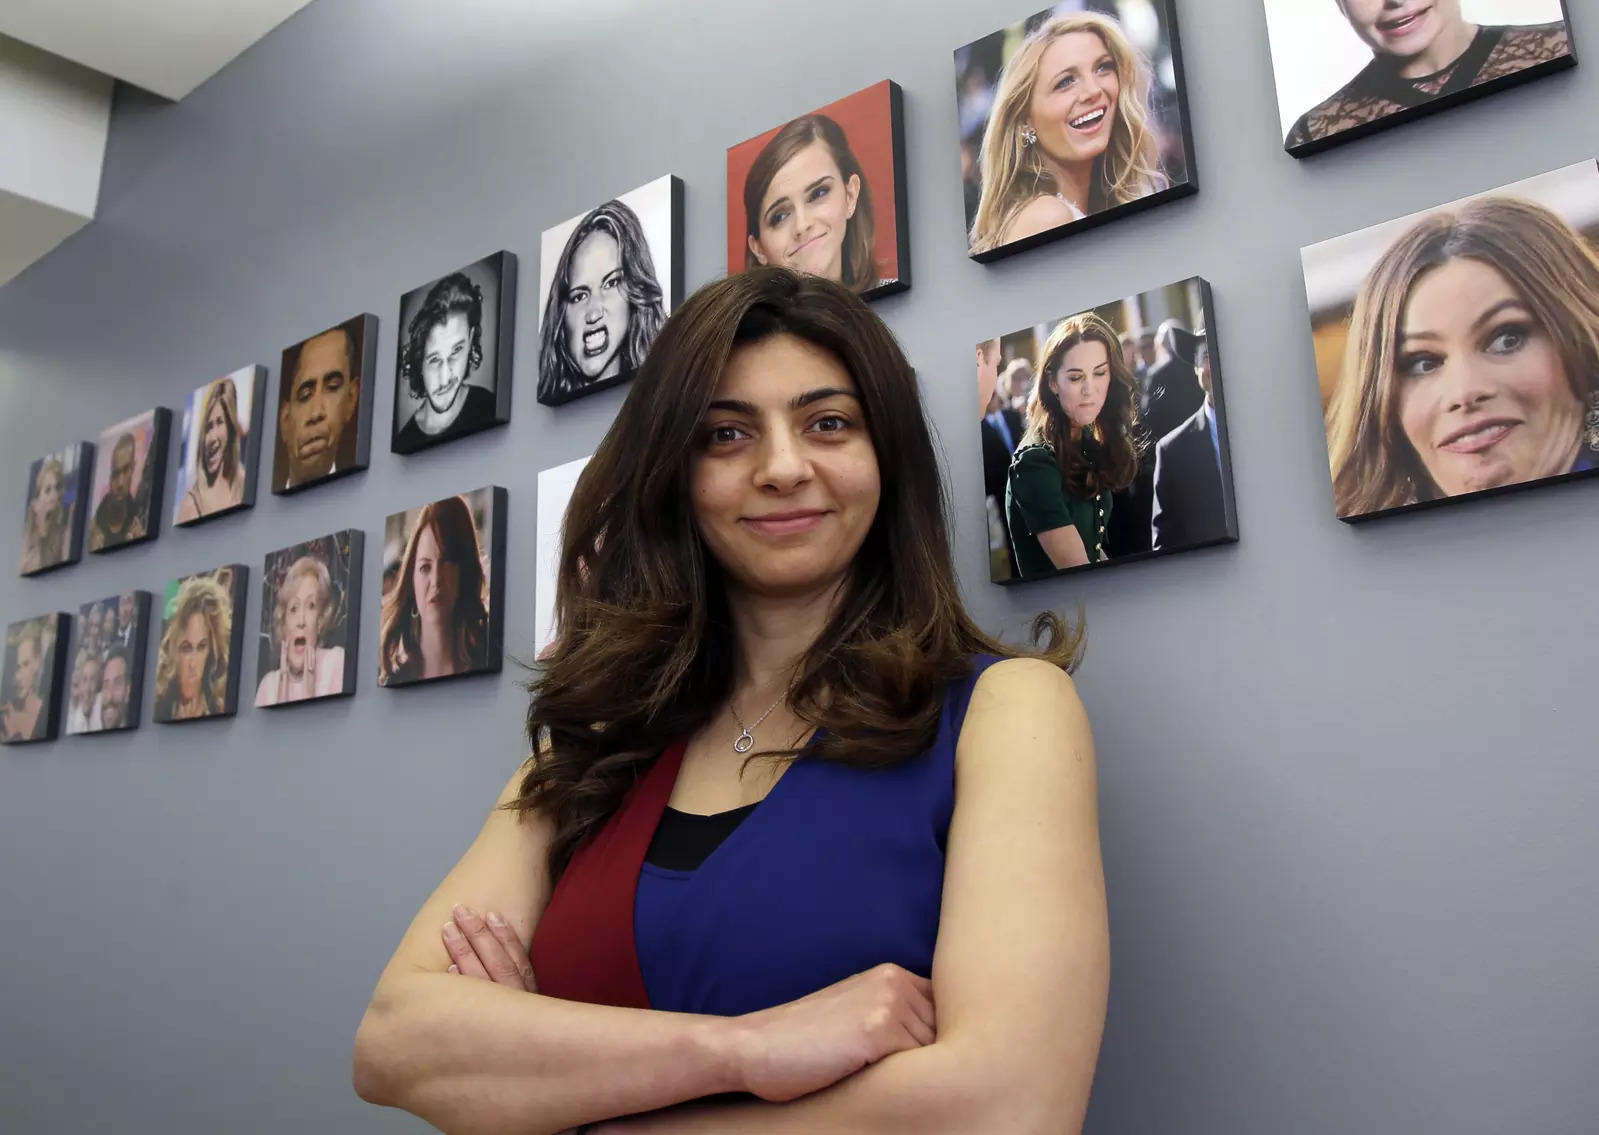 Rana el Kaliouby co-founded and led Boston startup Affectiva, which uses artificial intelligence and computer vision to analyze mood and emotion. Now she's got a new job as deputy CEO of Smart Eye, after the Swedish eye-tracking company bought Affectiva for $73.5 million in June